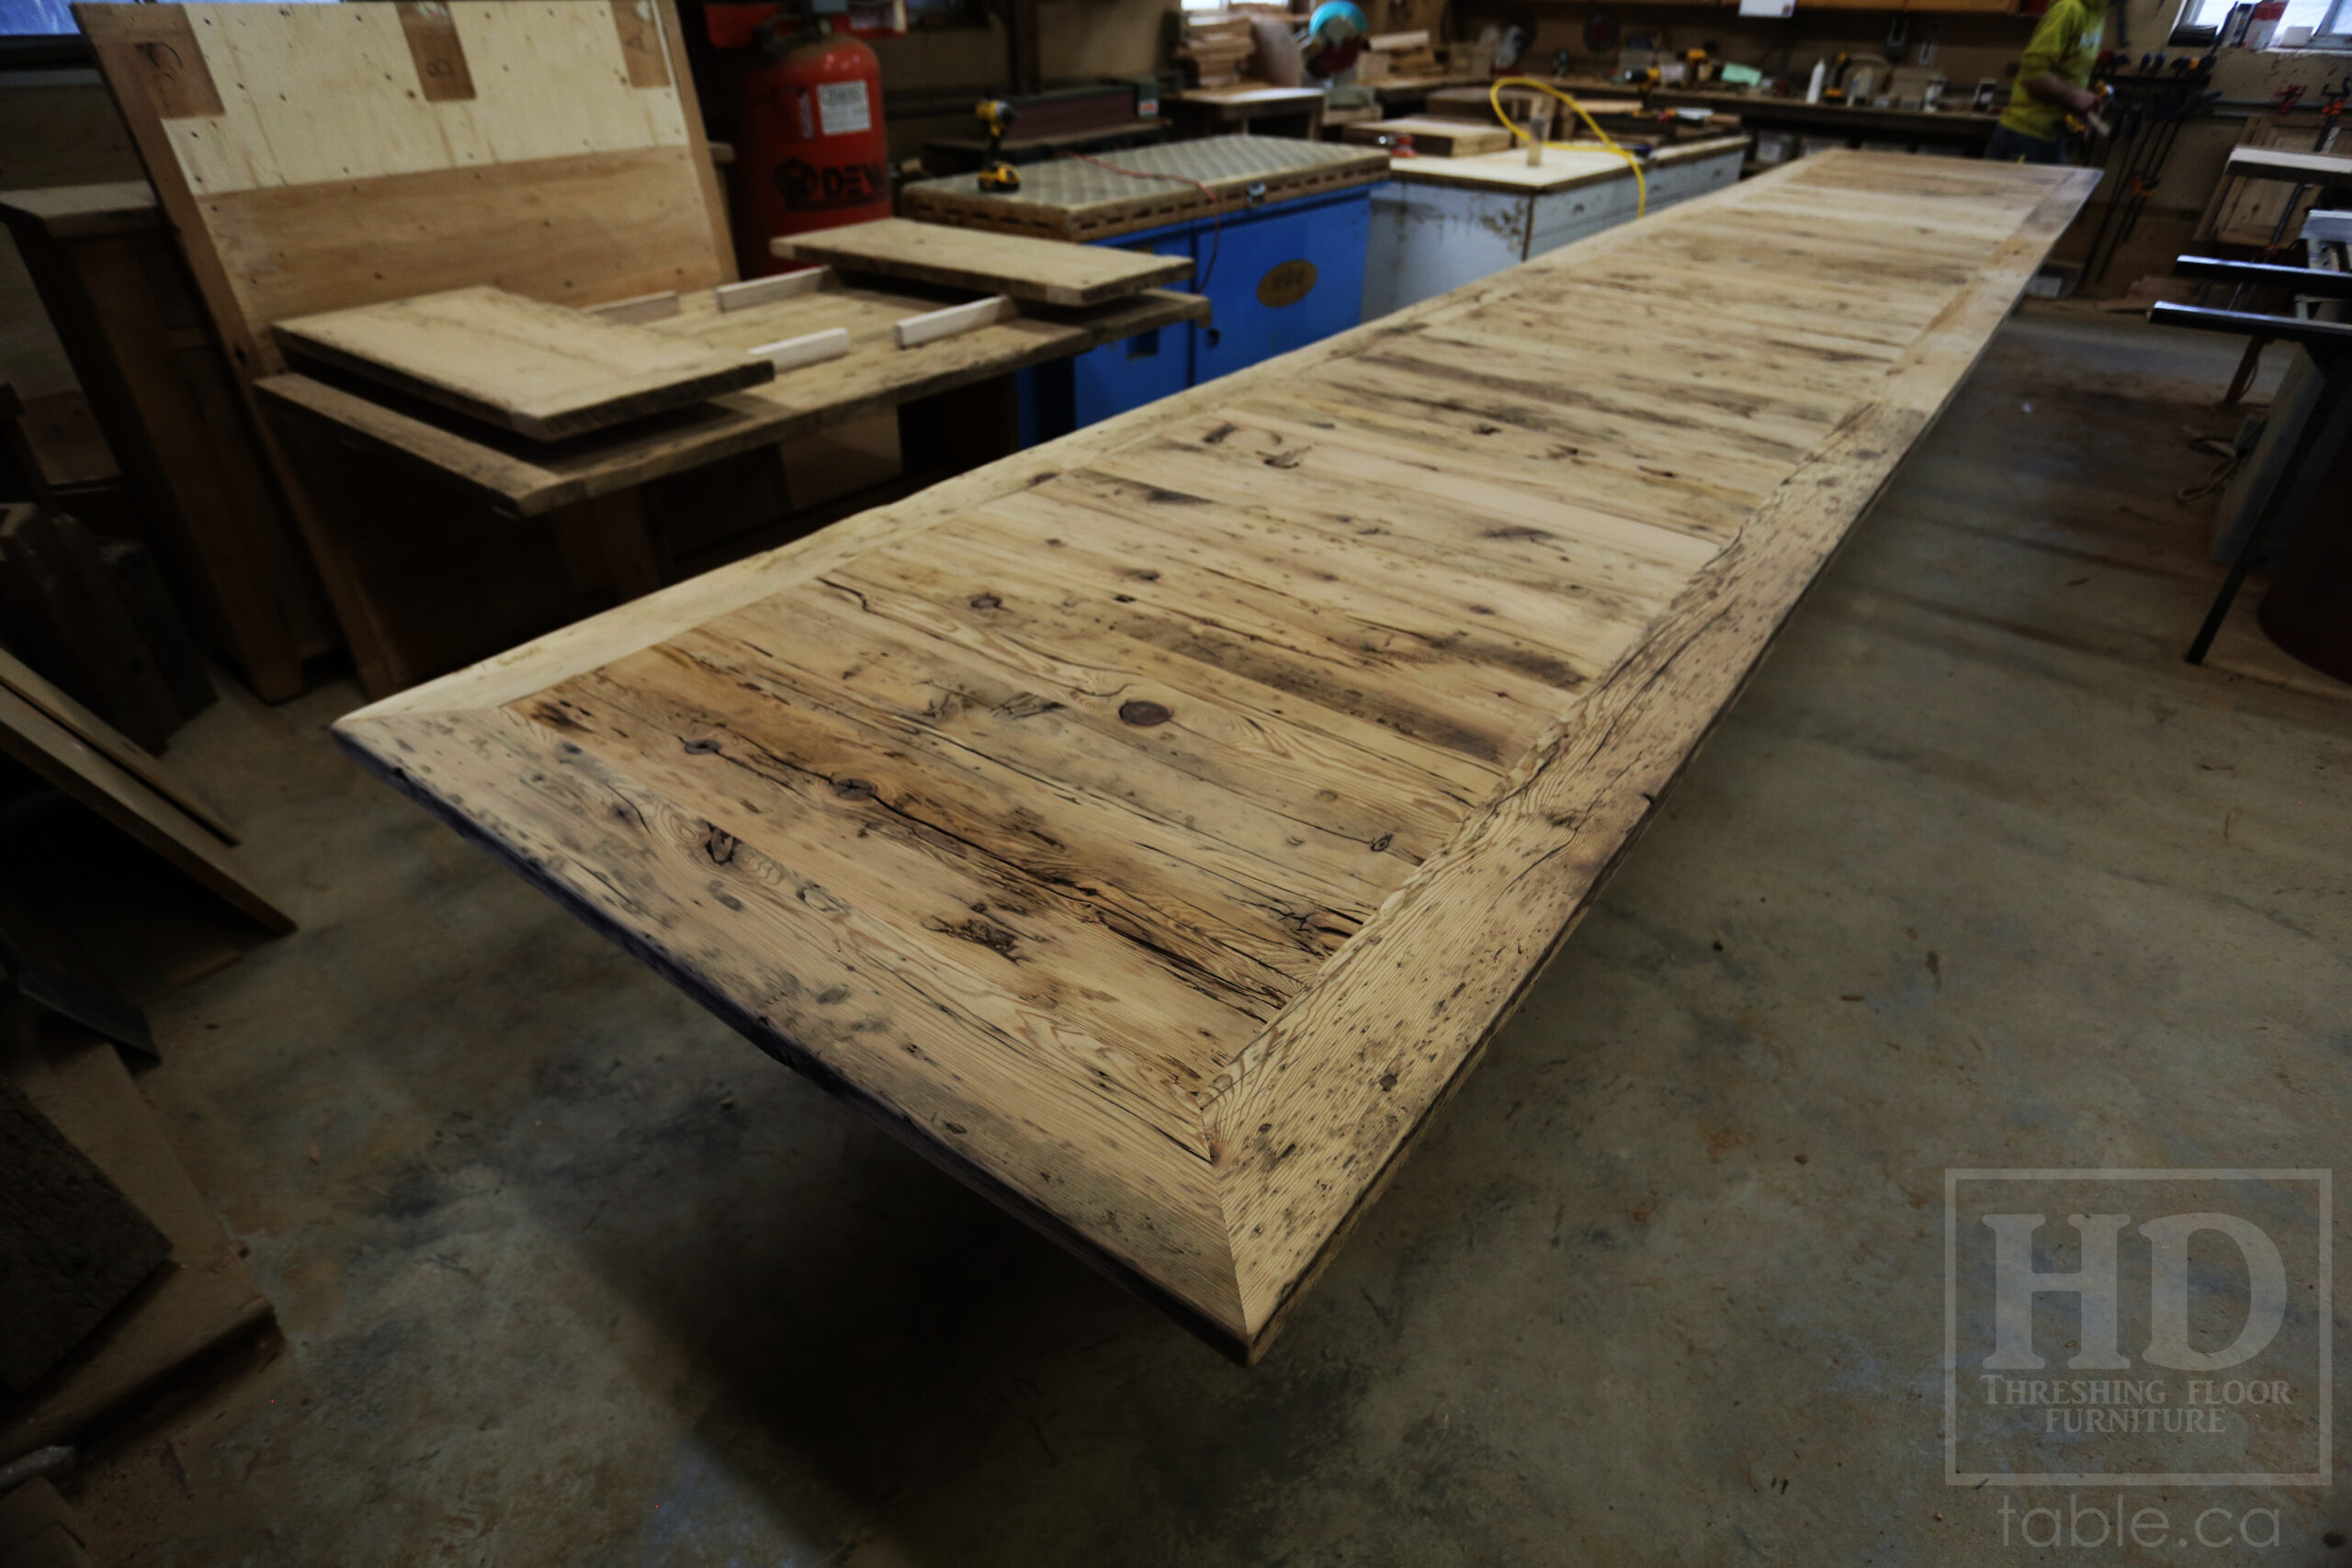 24 Ft Ontario Barnwood Table we made for a Guelph, Ontario company - 48" wide â€“ [3] 8' Sections [on site final doweling] - 3" Joist Plank Posts Base - Reclaimed Hemlock Threshing Floor 2â€ Top - Original edges & distressing maintained - Premium epoxy + satin polyurethane finish - www.table.ca